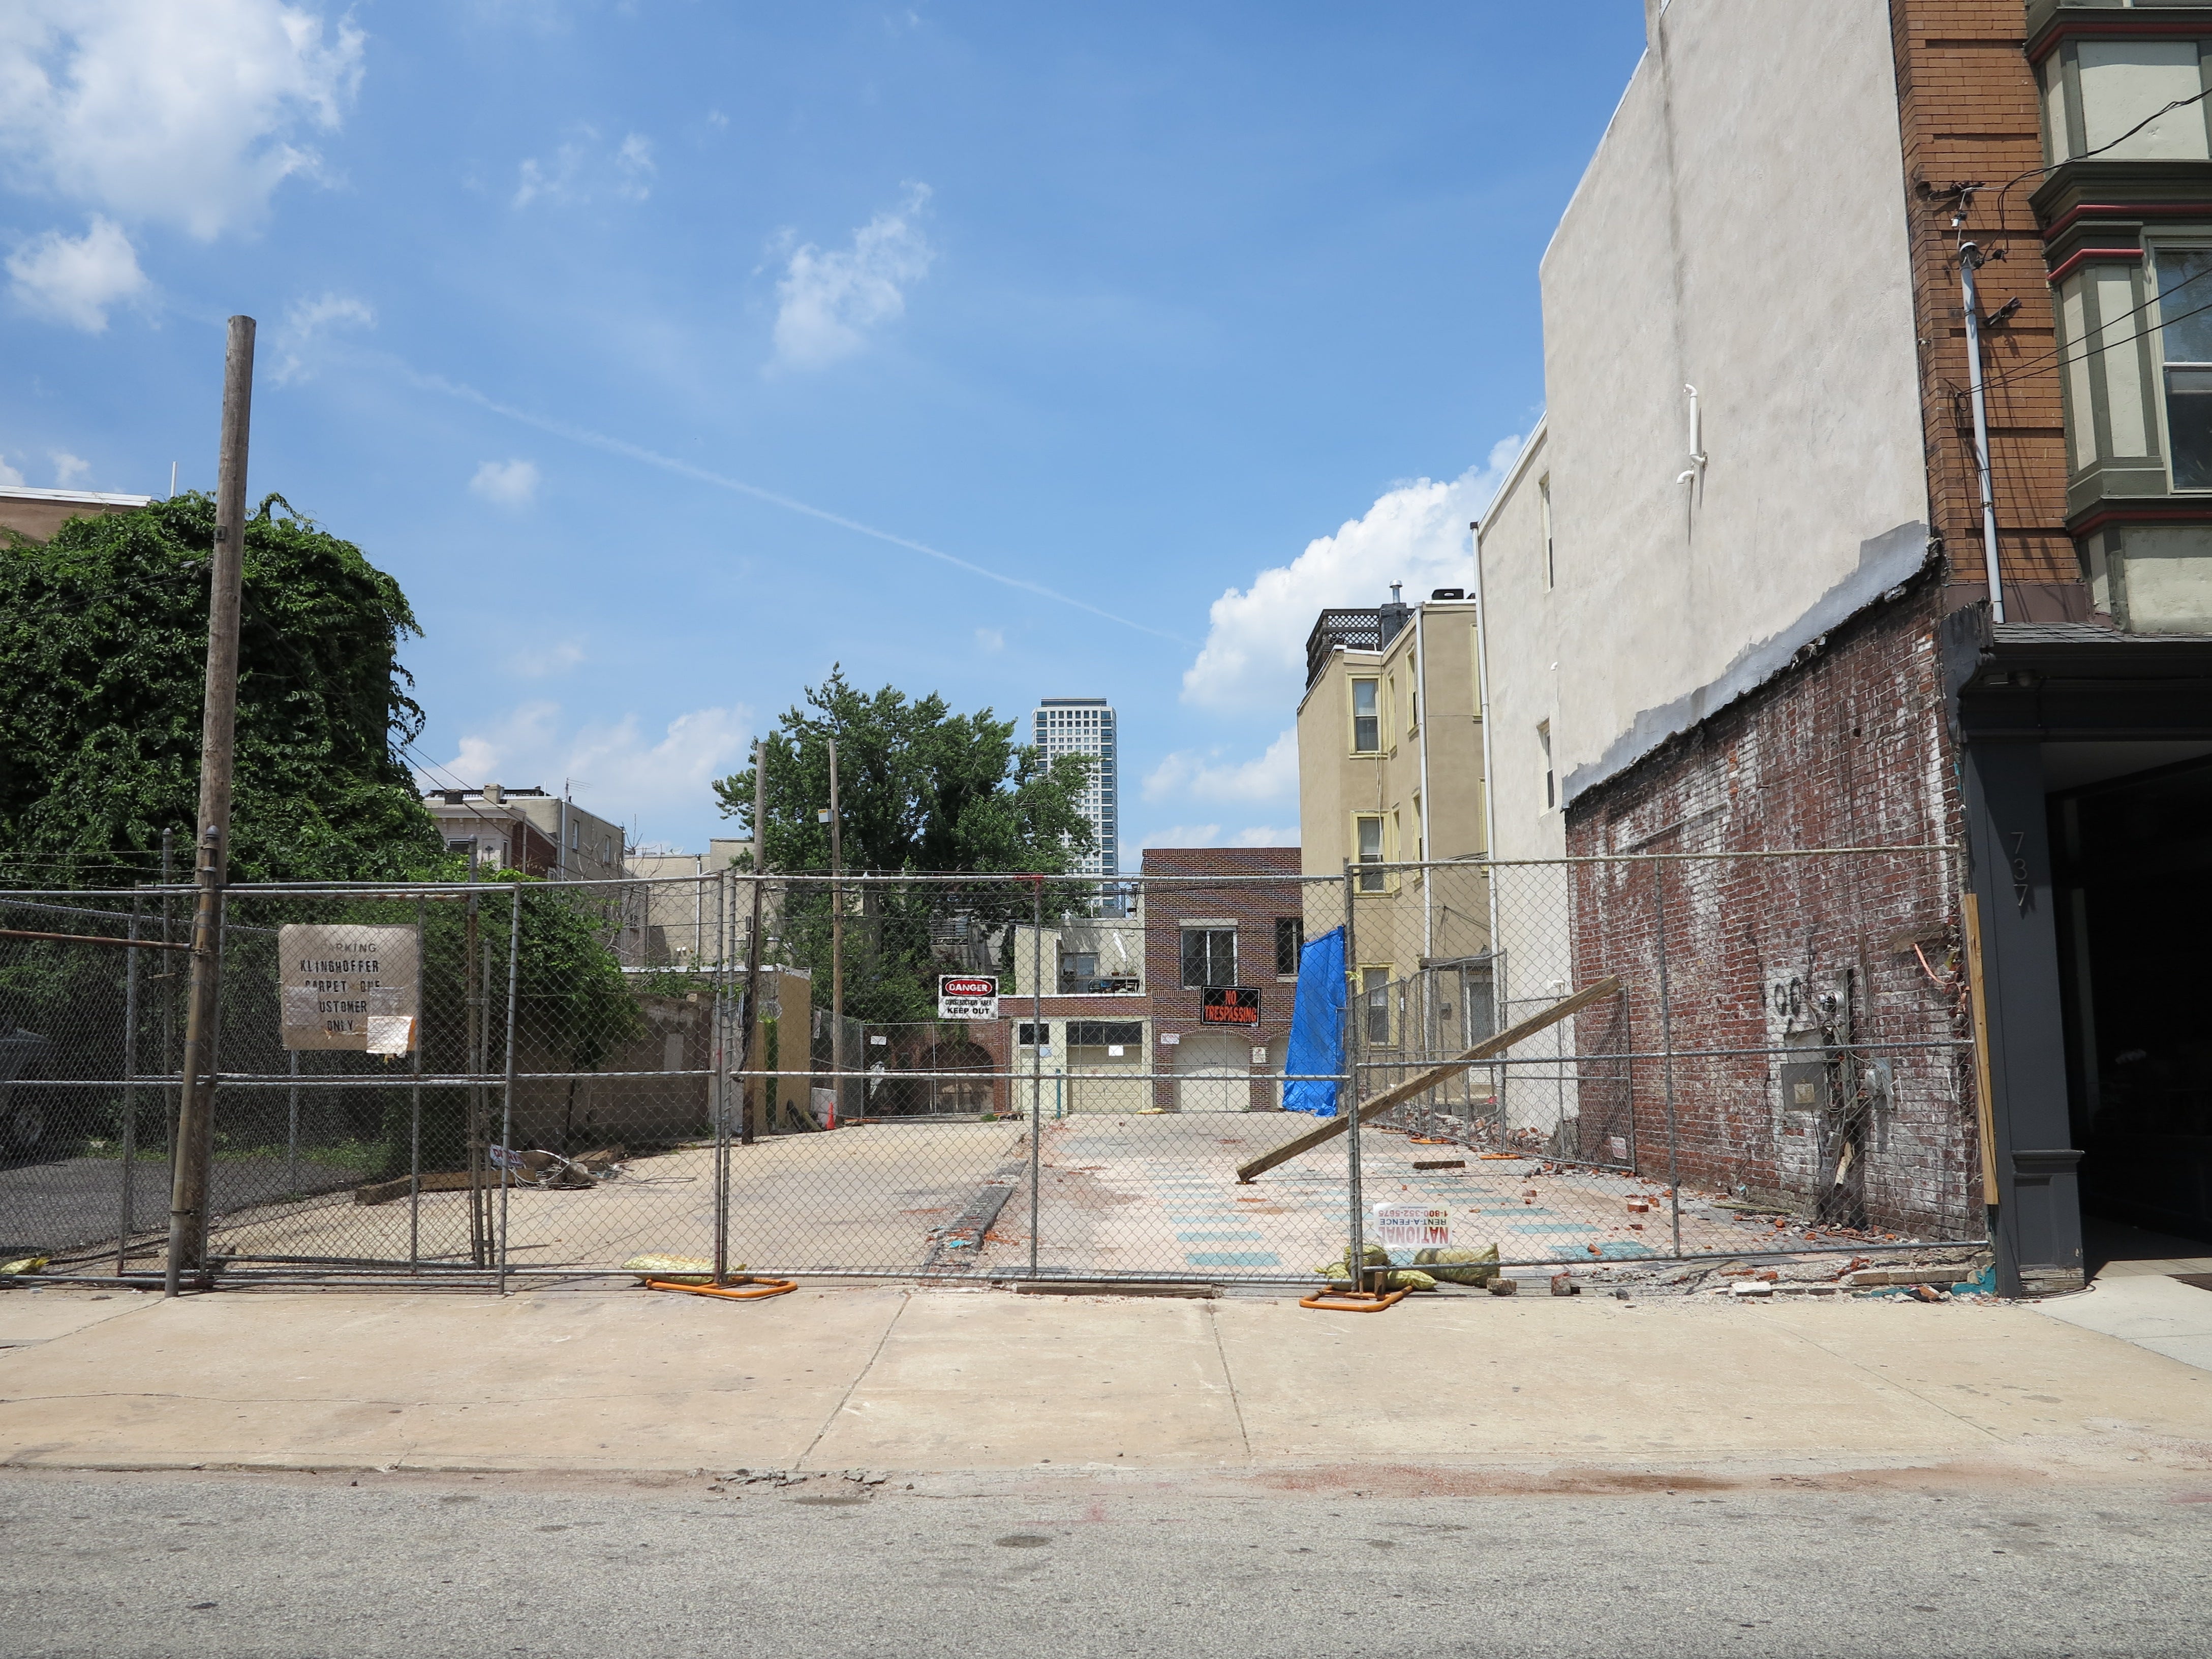 Cleared lots on 700 block of Bainbridge looking north toward Kater, slated for garage-fronted rowhouses